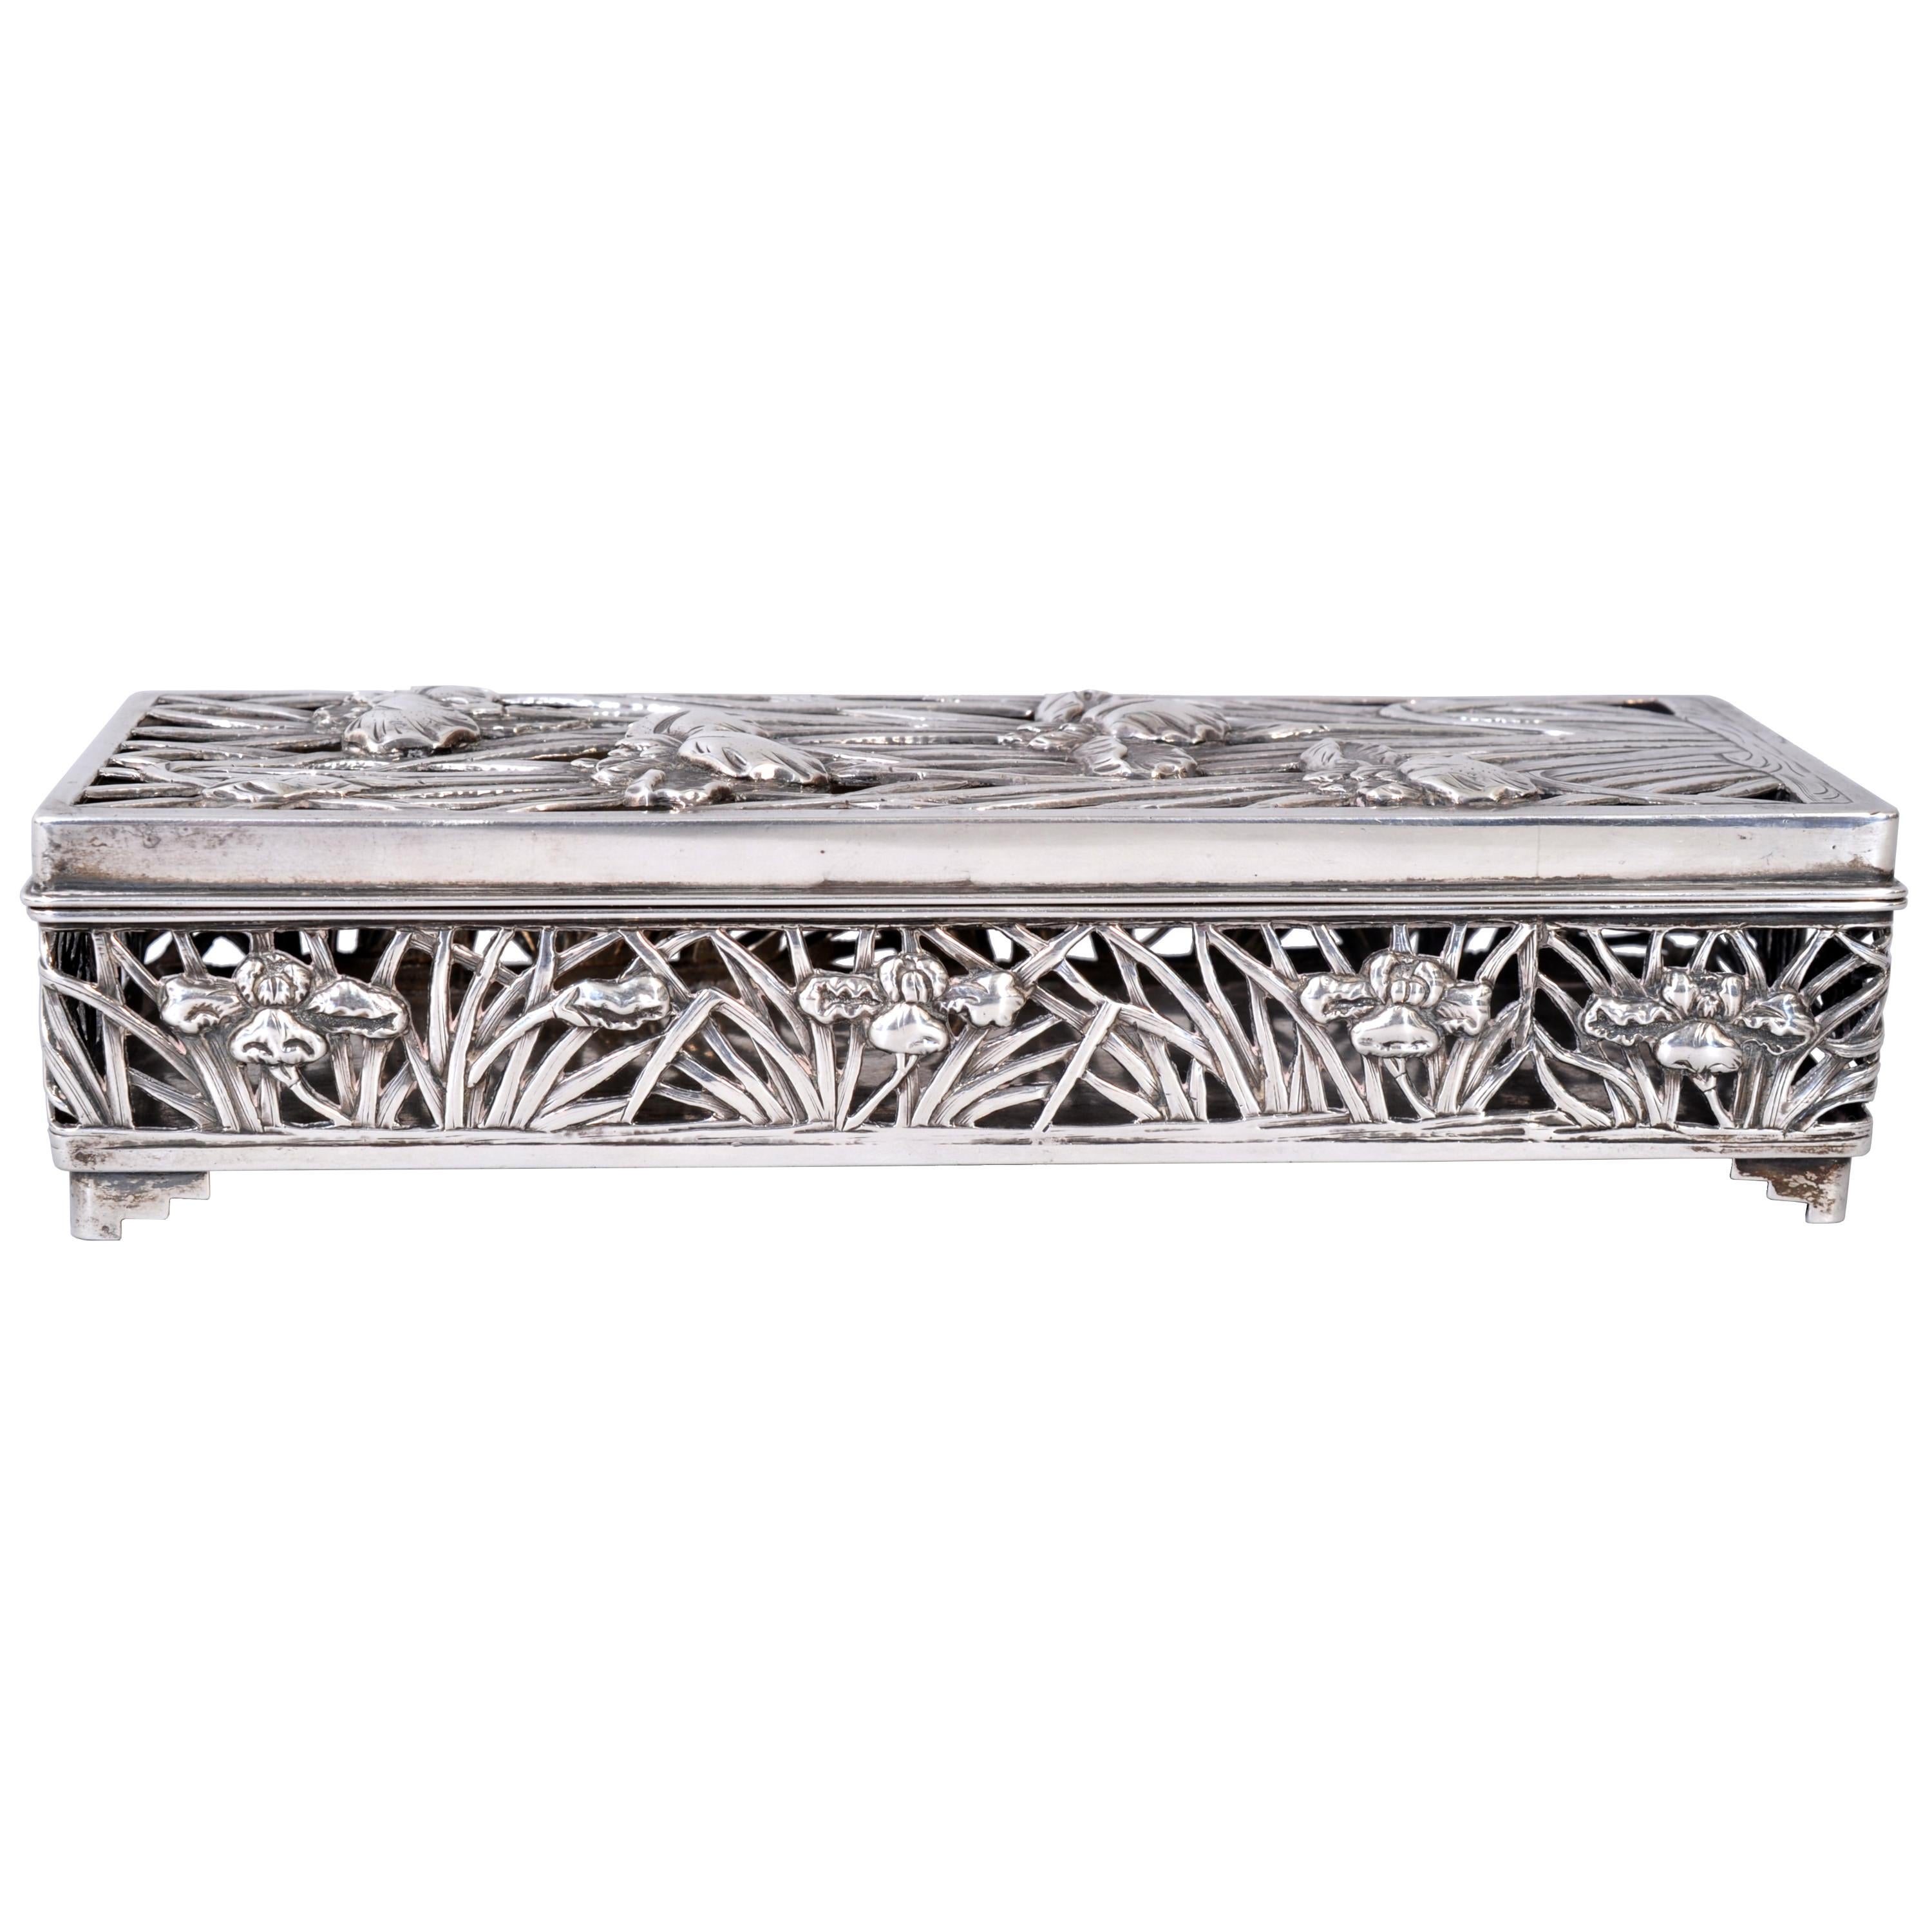 A magnificent antique Chinese export silver box/pot-pourri by Wang Hing, circa 1880.
The hinged lidded box is very finely decorated with repousse pierced work on the lid and sides, with water lilly decoration, fully marked to the base and raised on